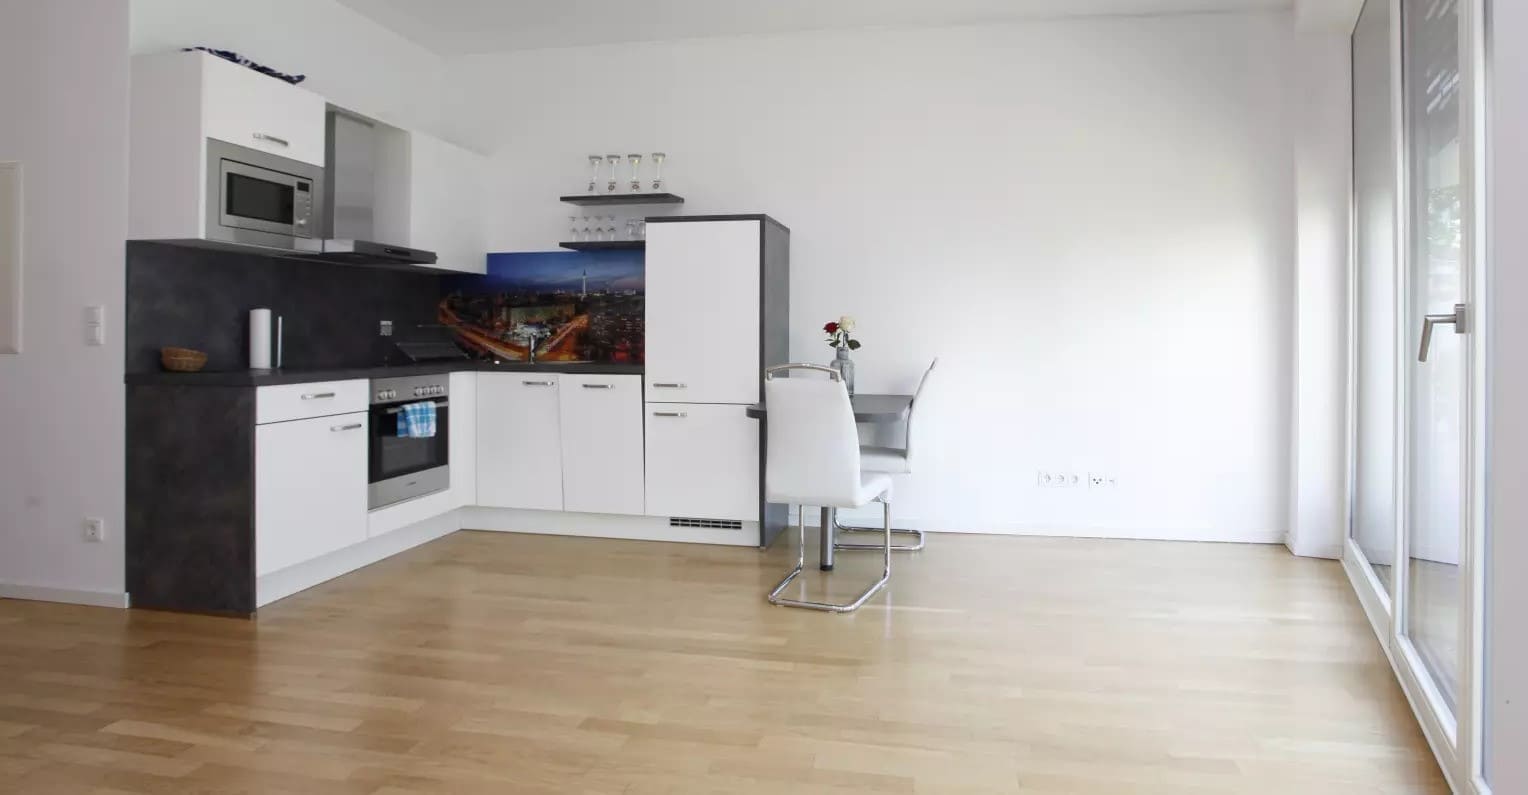 Fully furnished apartments for rent in berlin